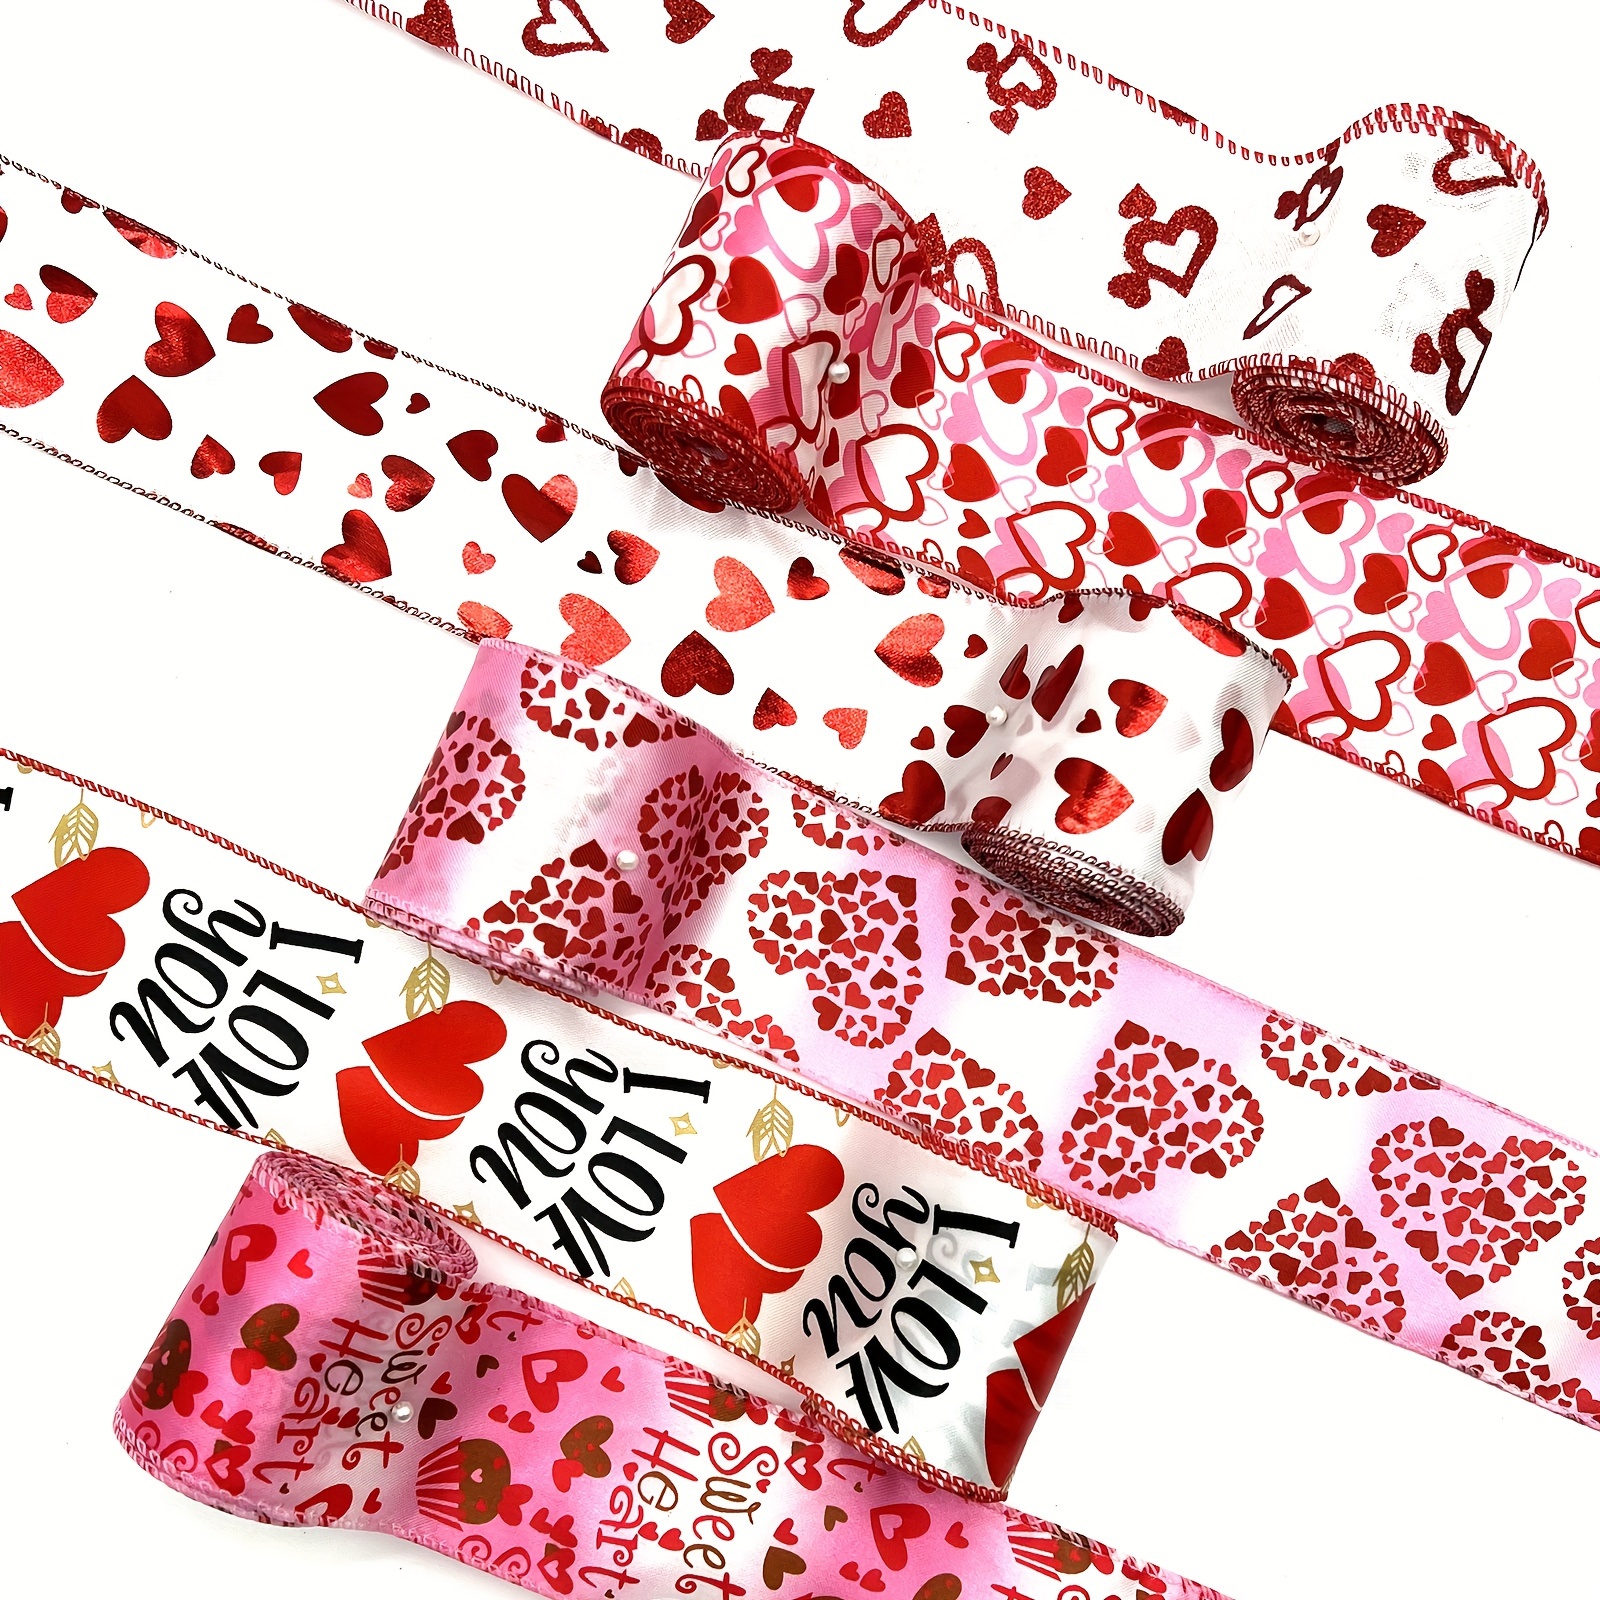 6 Rolls Valentine Ribbon Love Heart Printed Grosgrain Ribbons Red and White  Gift Wrap Ribbons Valentine's Day Wired Ribbon for DIY Crafts Wrapping